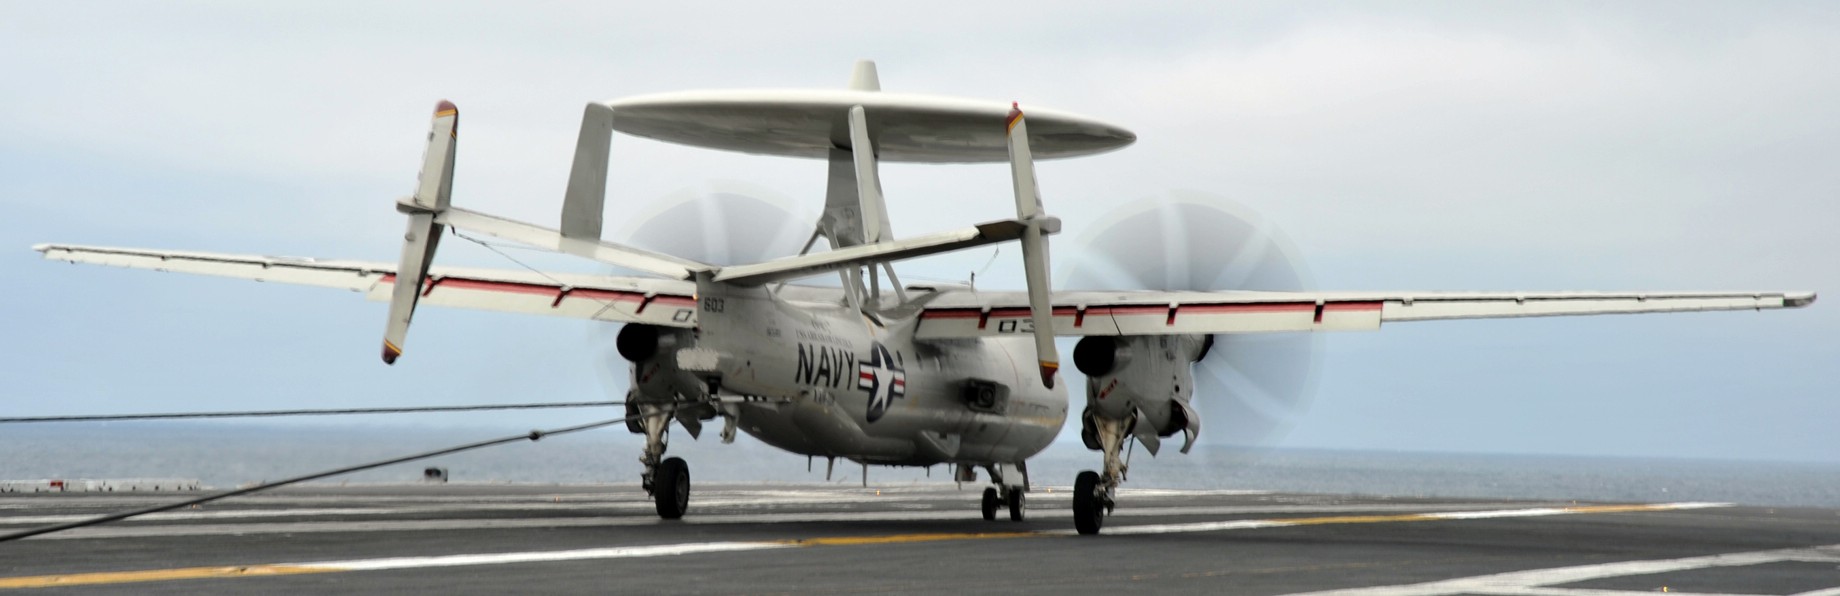 vaw-116 sun kings airborne command control squadron carrier early warning cvw-2 uss abraham lincoln cvn-72 24